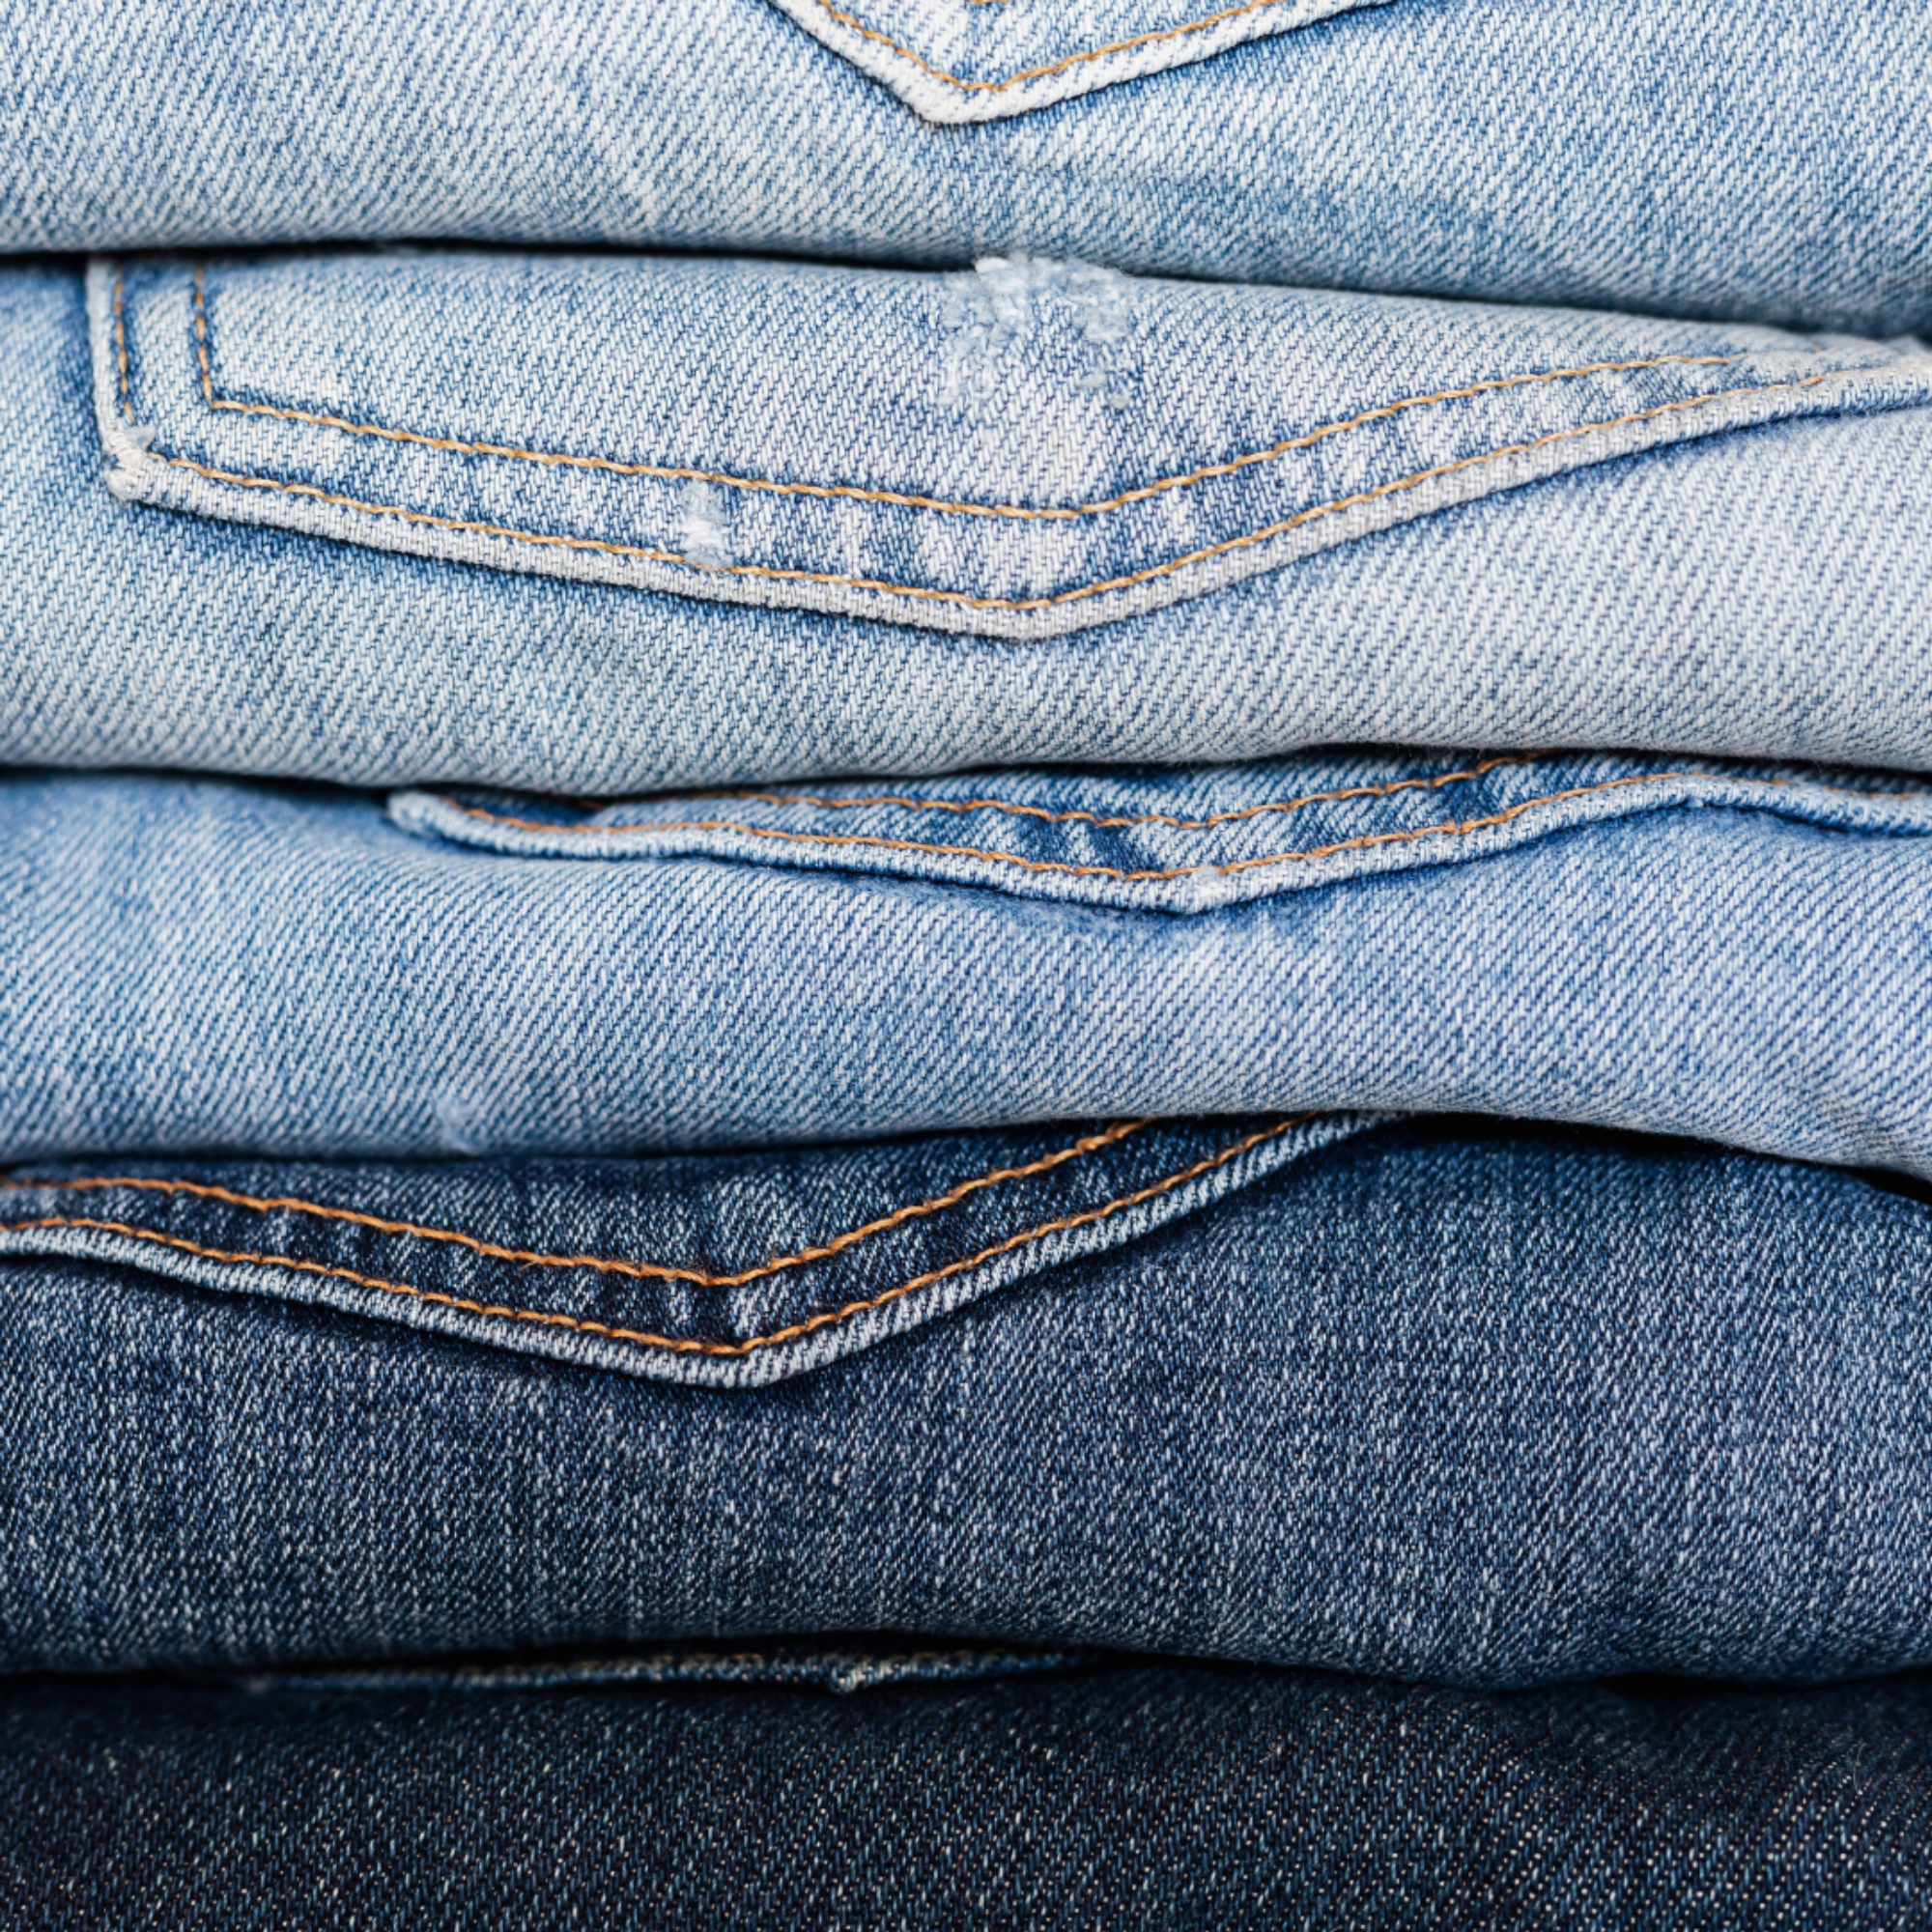 Image of different washes of denims